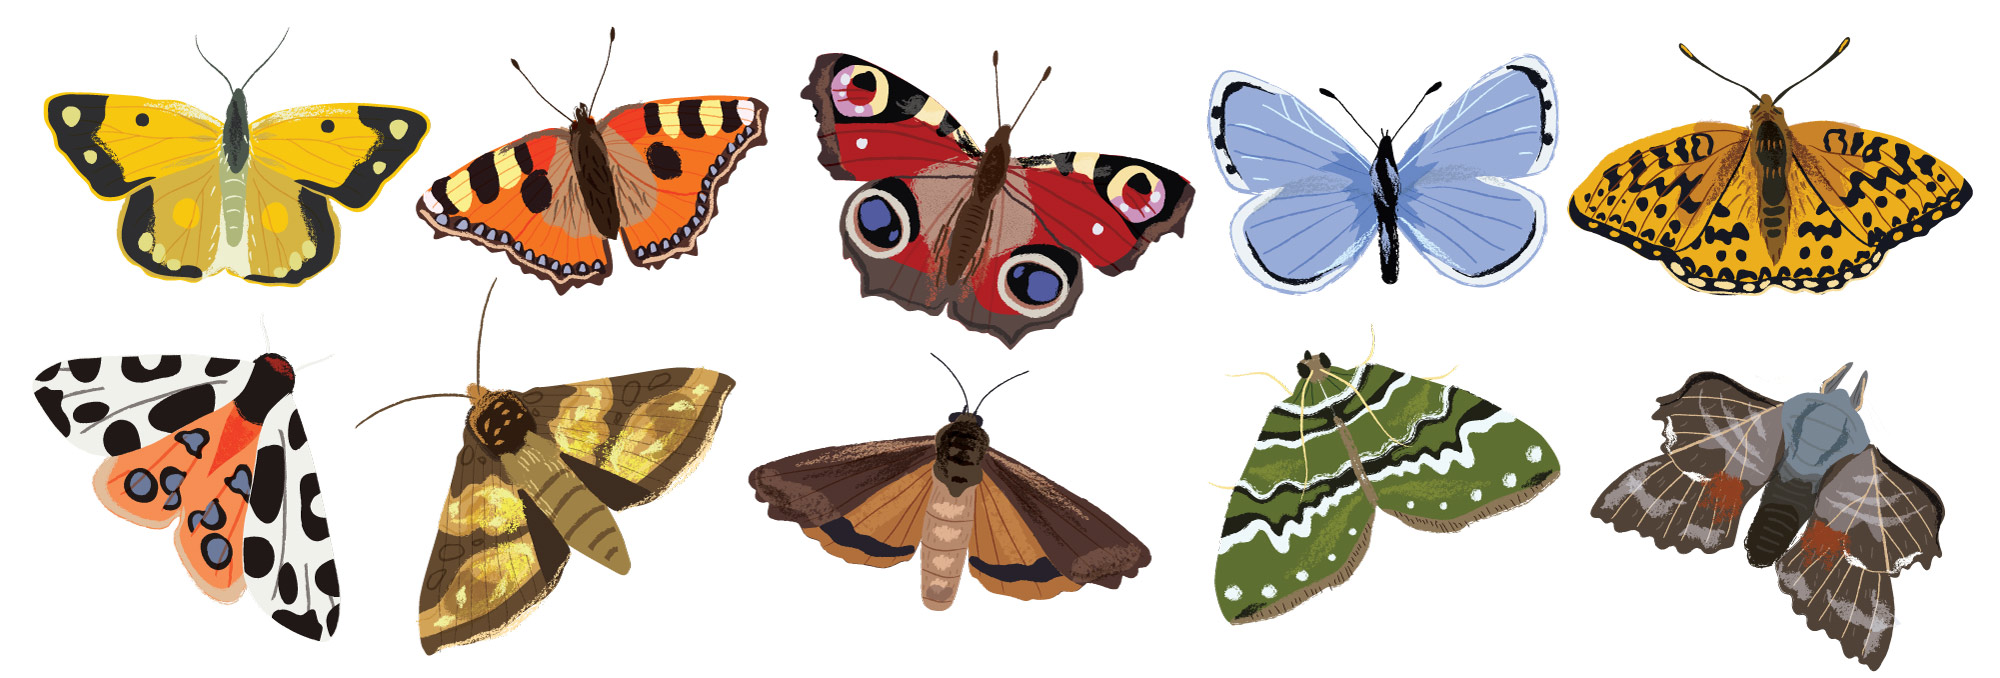 A selection of butterflies and moths for Nature Month by Month by Elly Jahnz